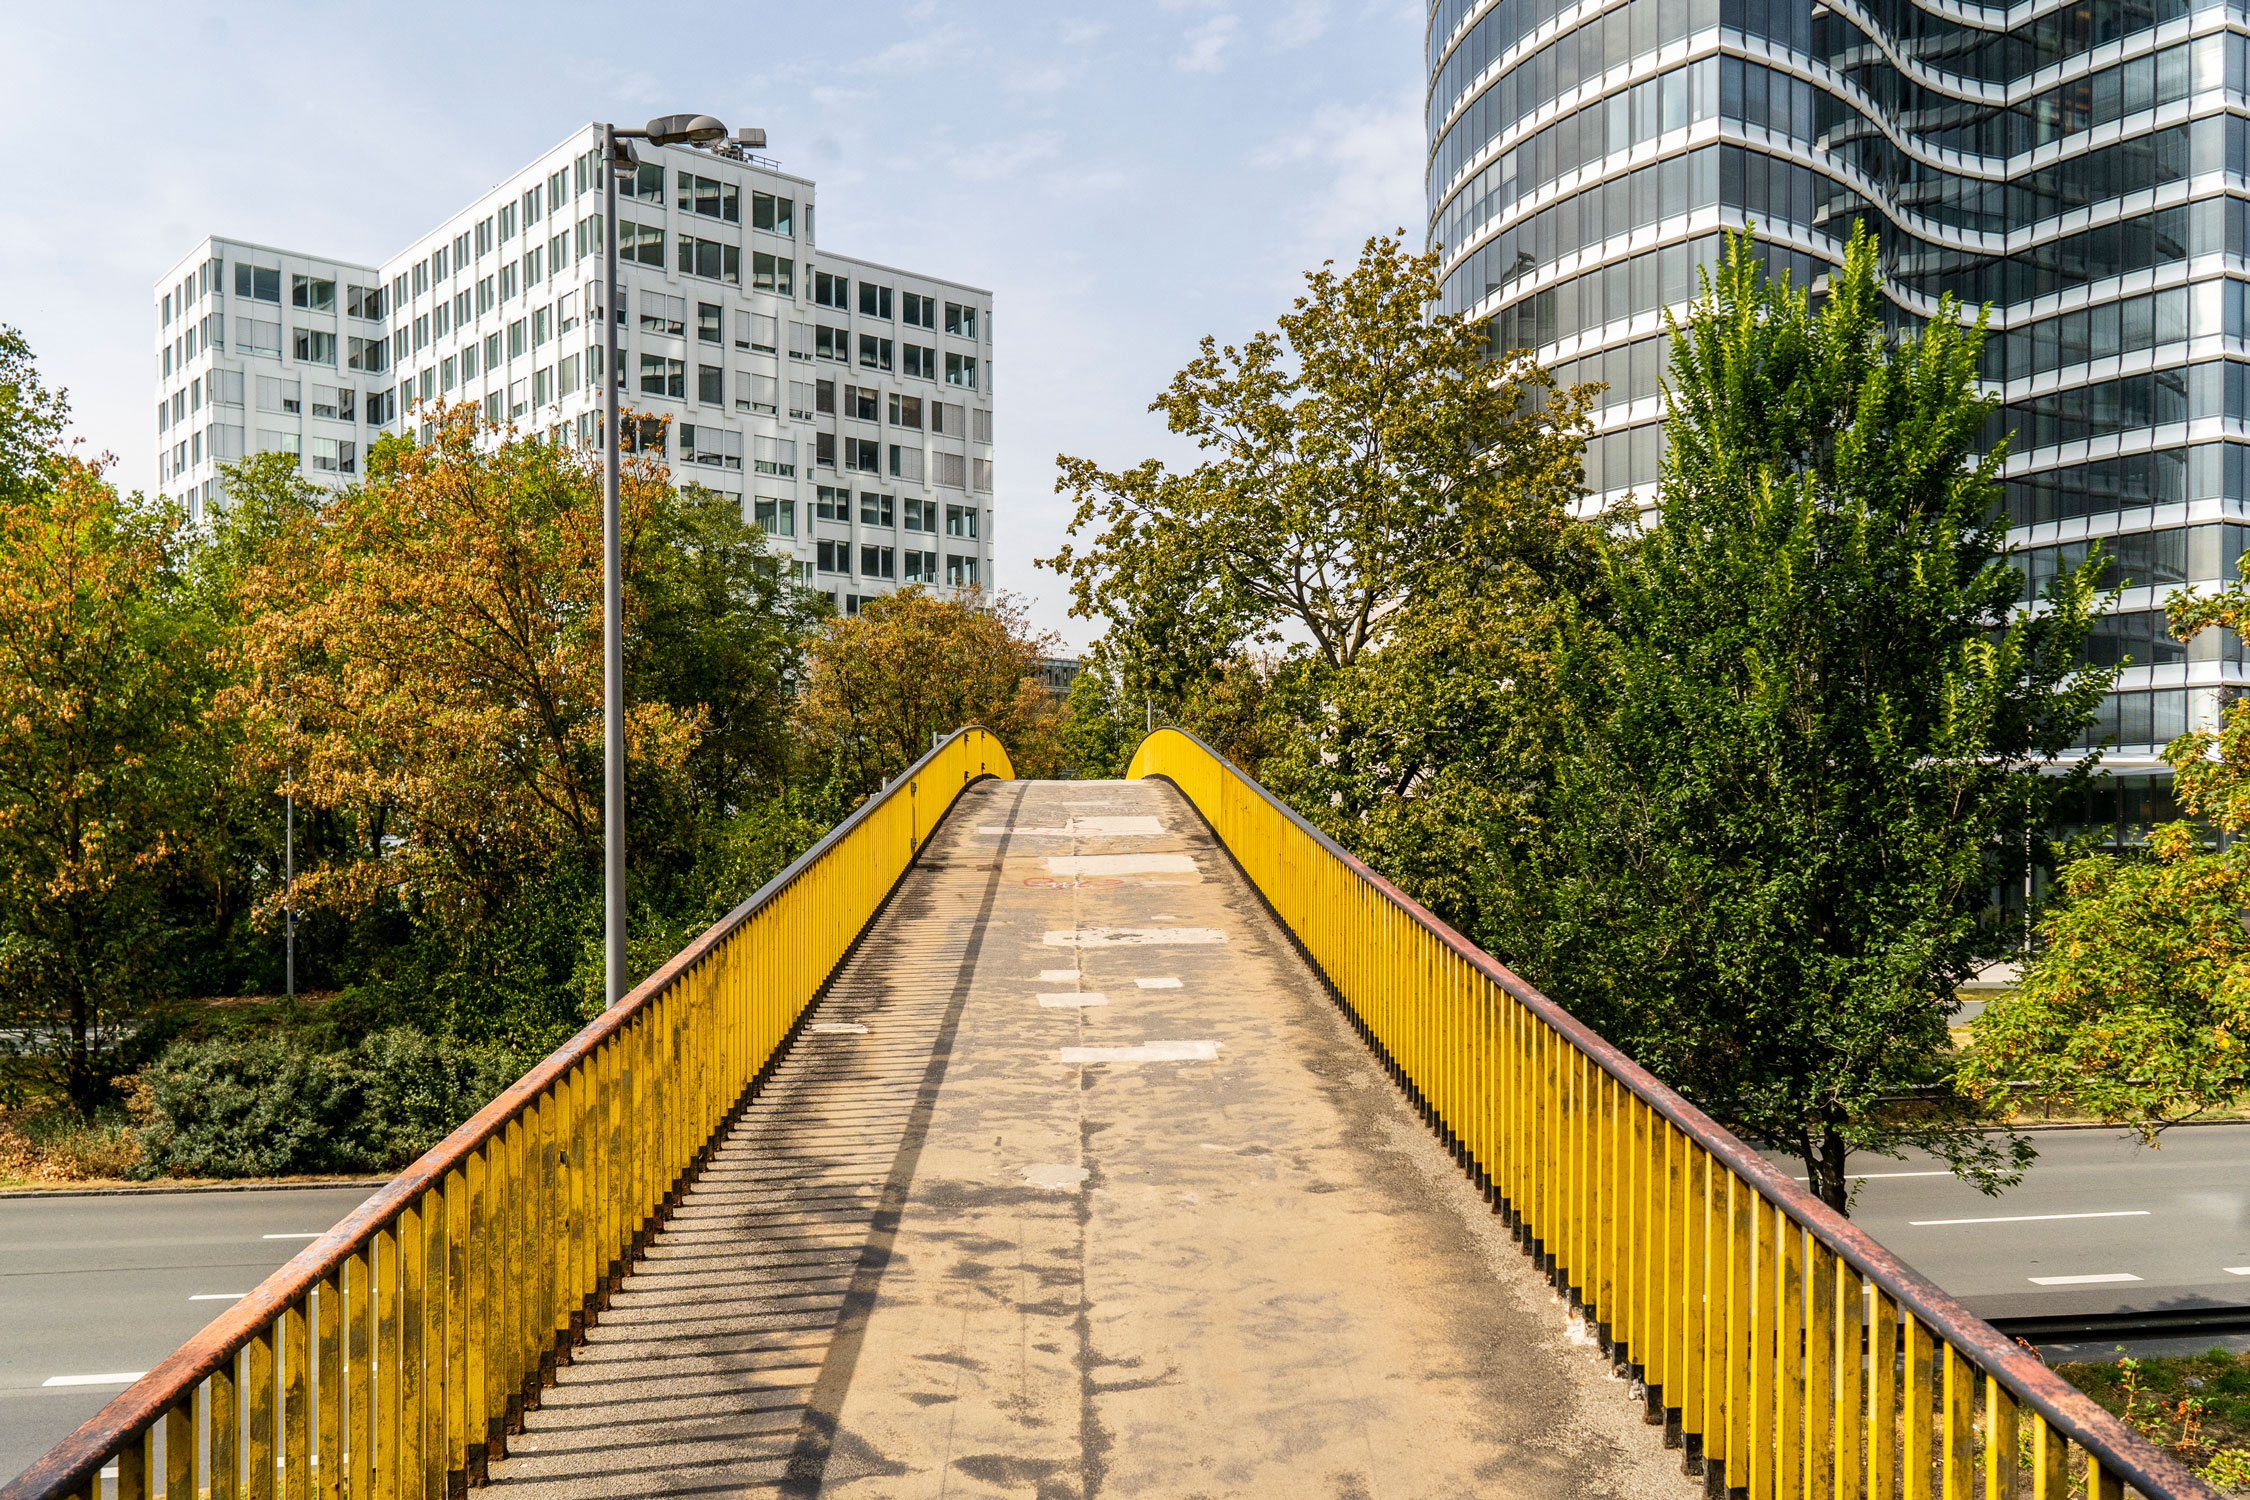 View of a bridge over a multi-lane road. The railing is painted yellow and trees have been planted next to the bridge. The bridge runs towards several high-rise buildings.